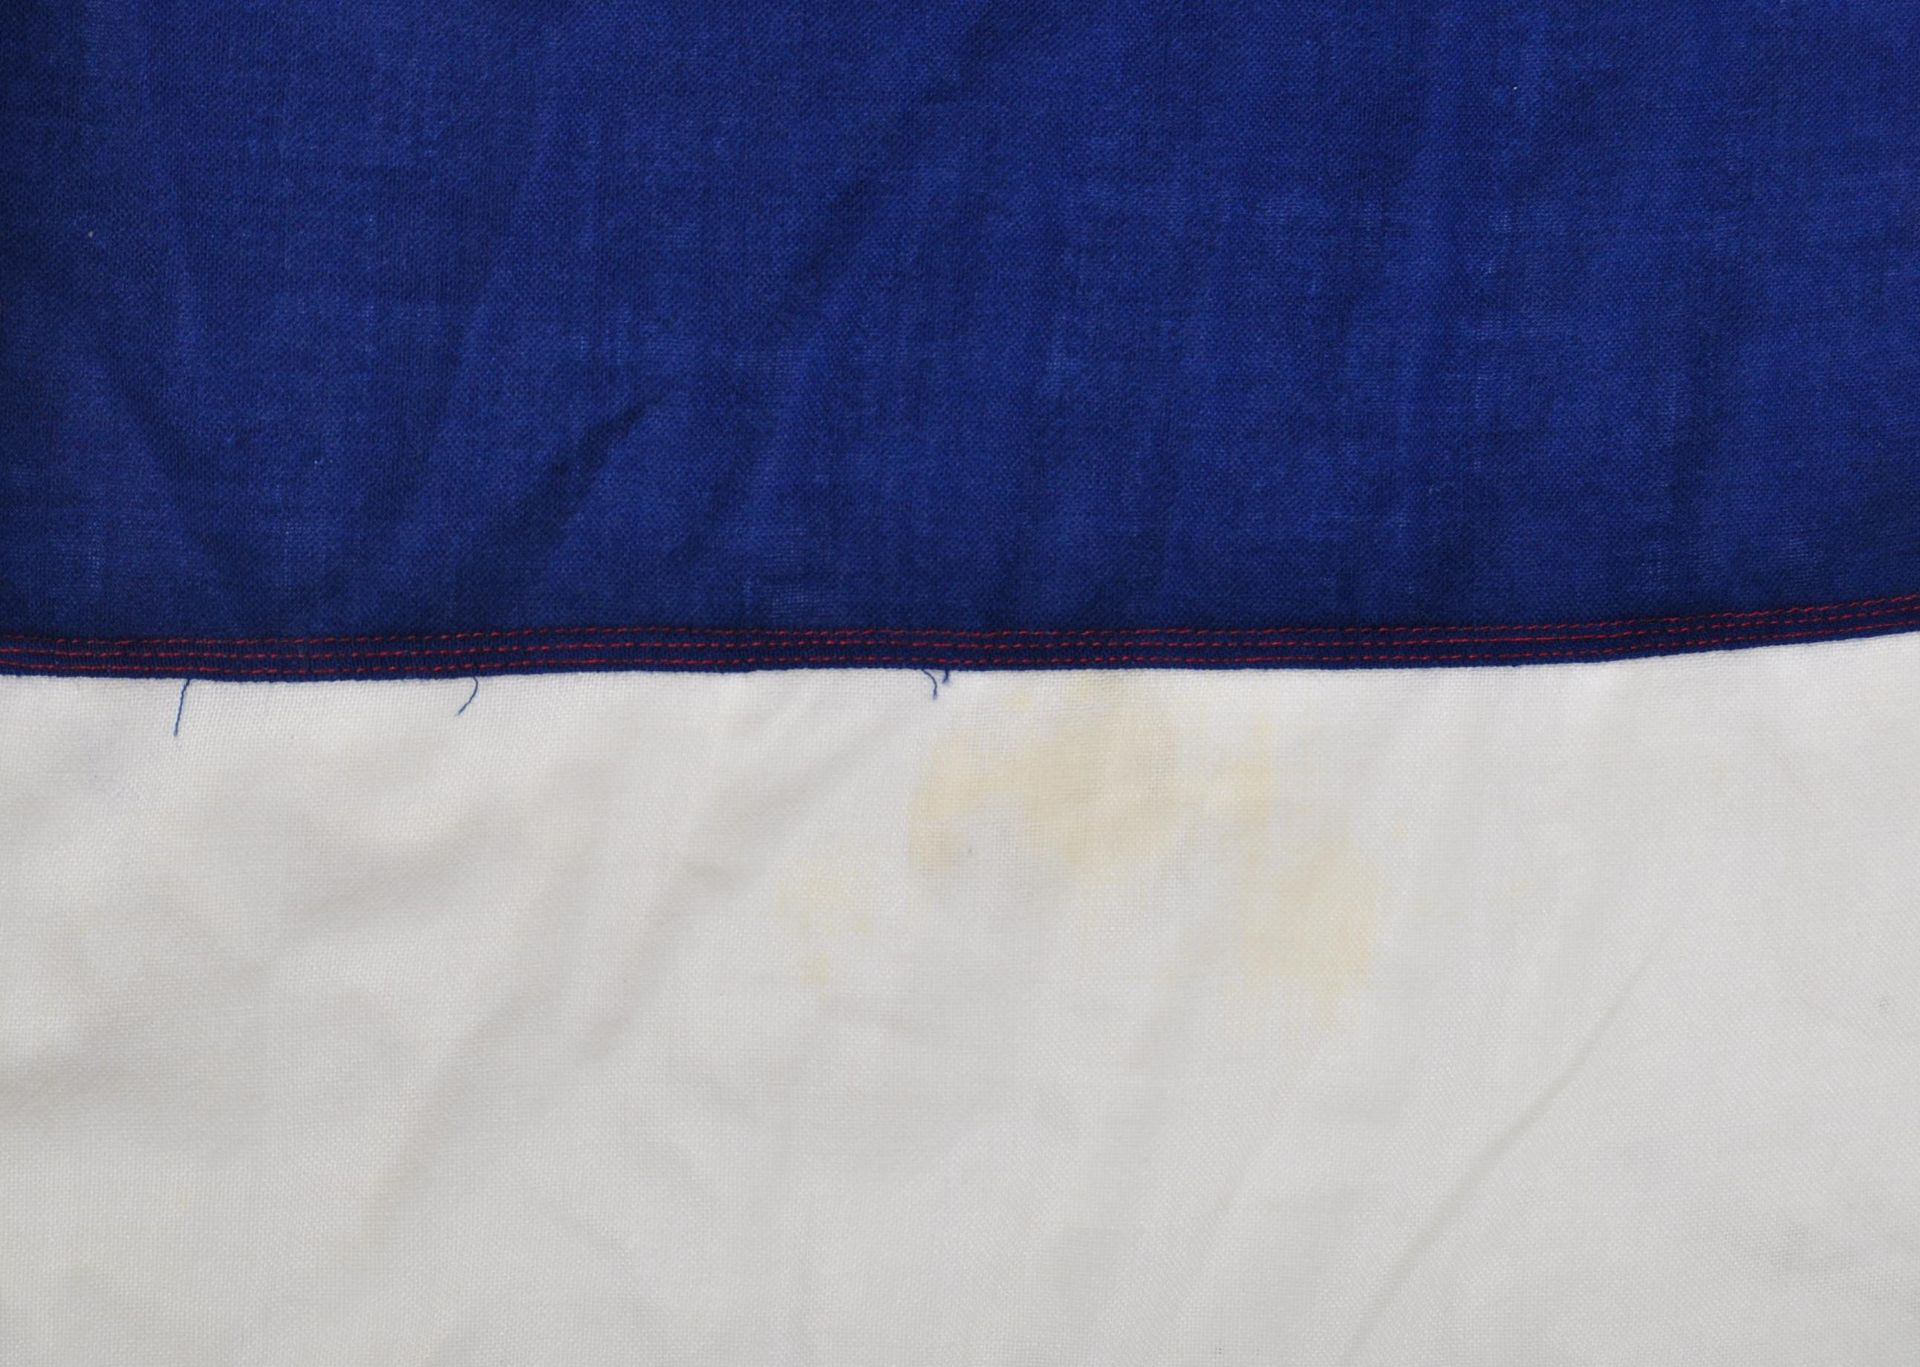 LARGE 20TH CENTURY FRENCH LINEN FLAG - Image 3 of 4